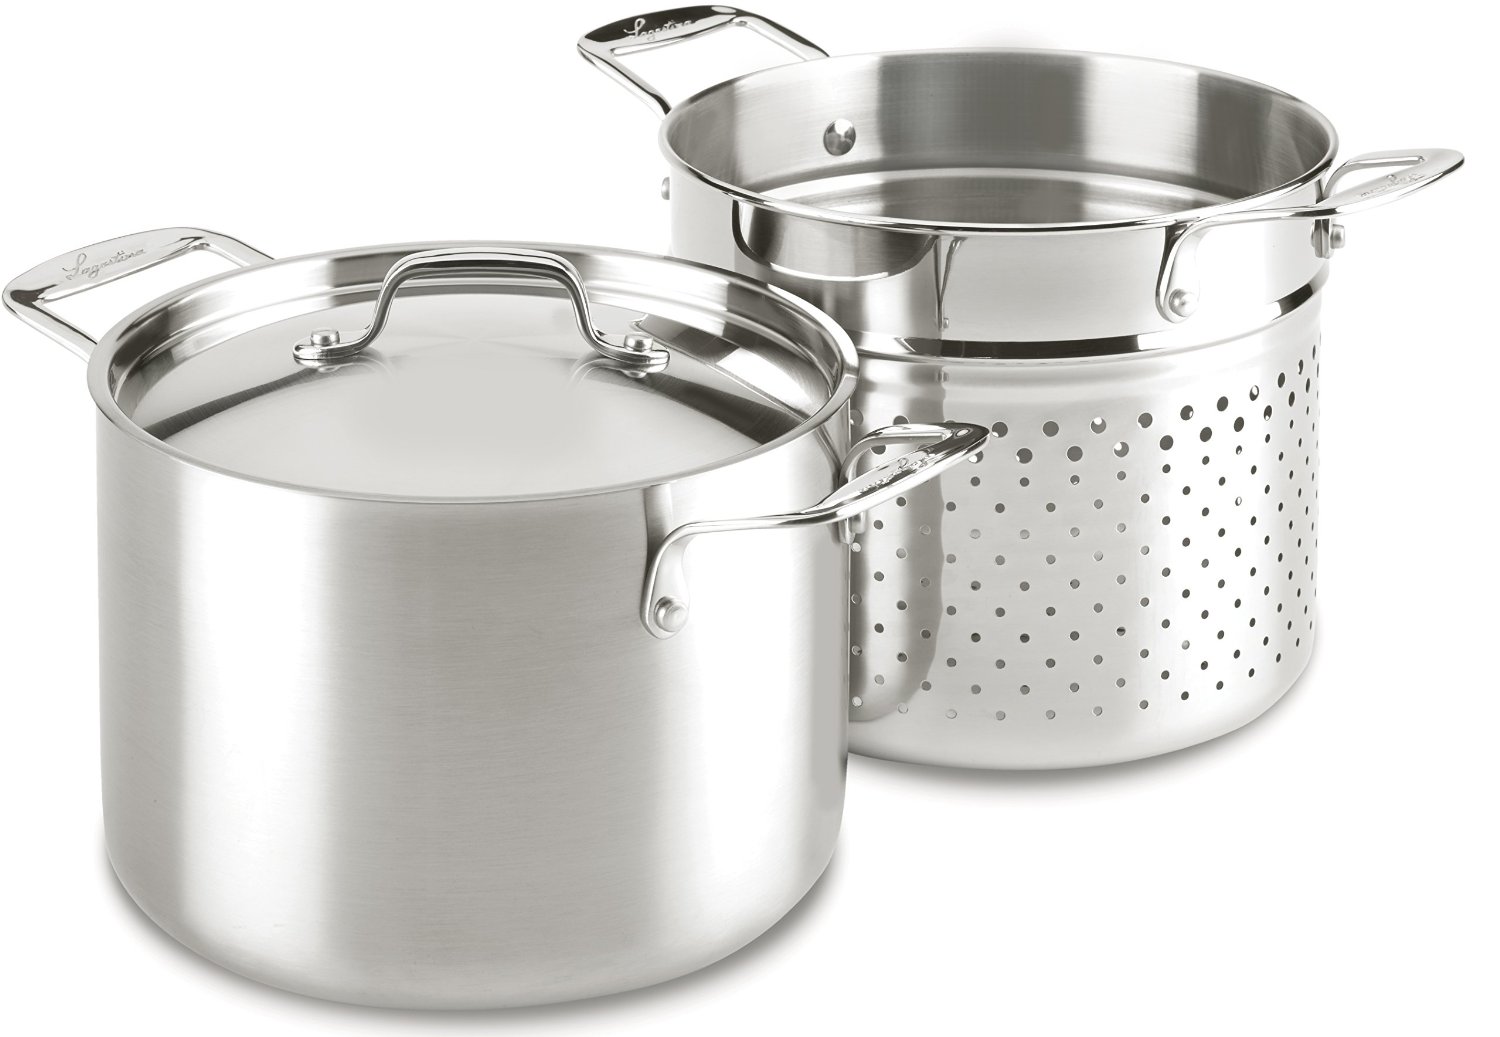 Lagostina stainless steel pasta pot with strainer has a limited ...